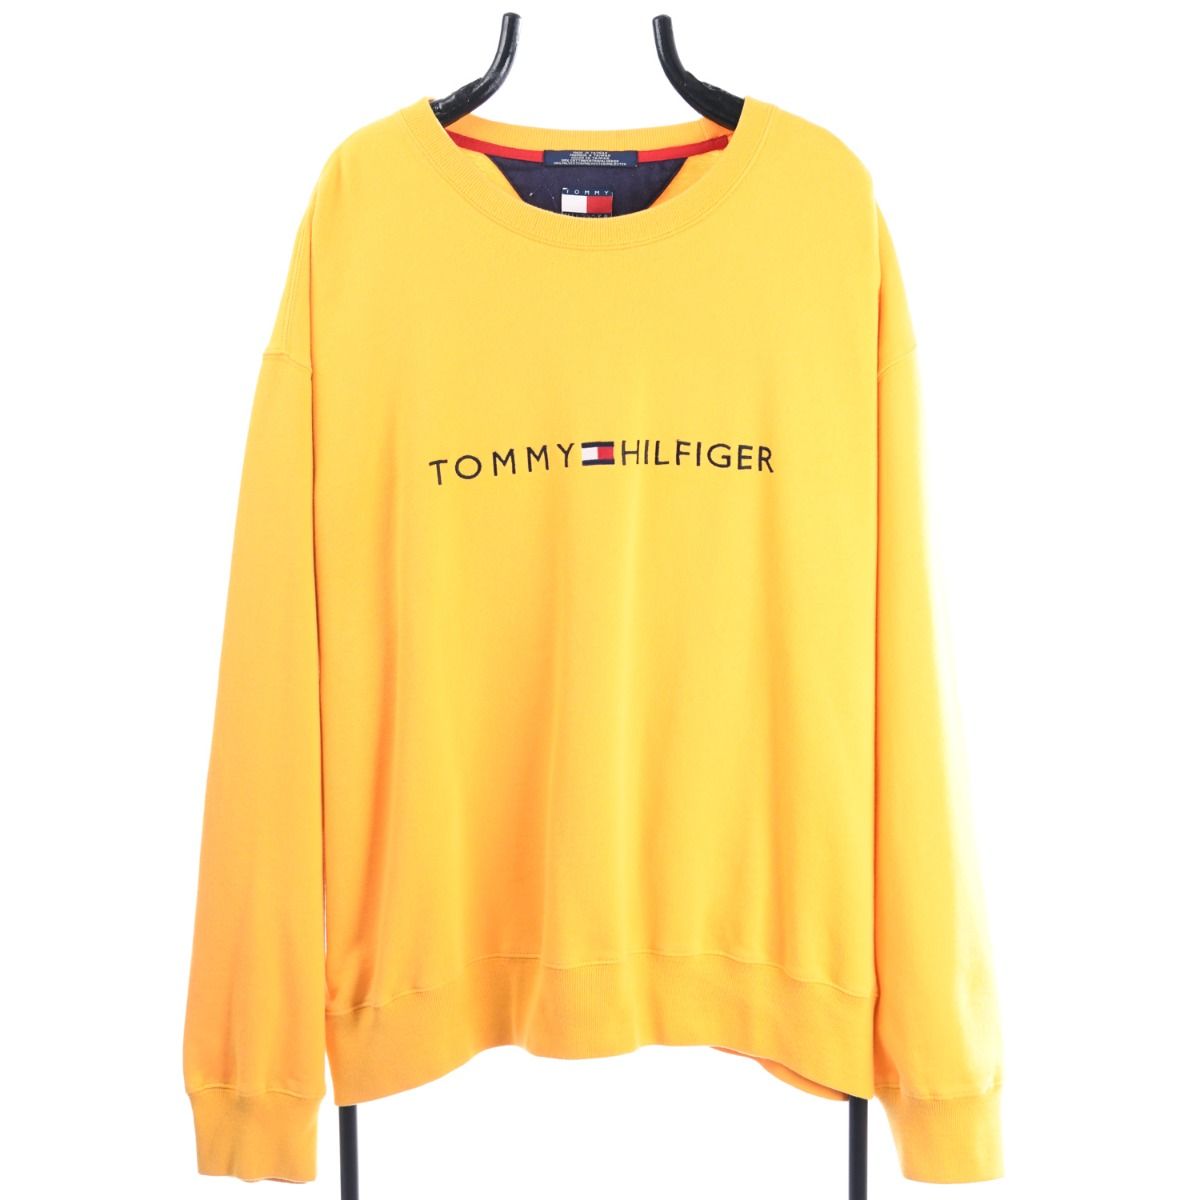 Tommy Hilfiger Embroidered Spell Out Sweatshirt